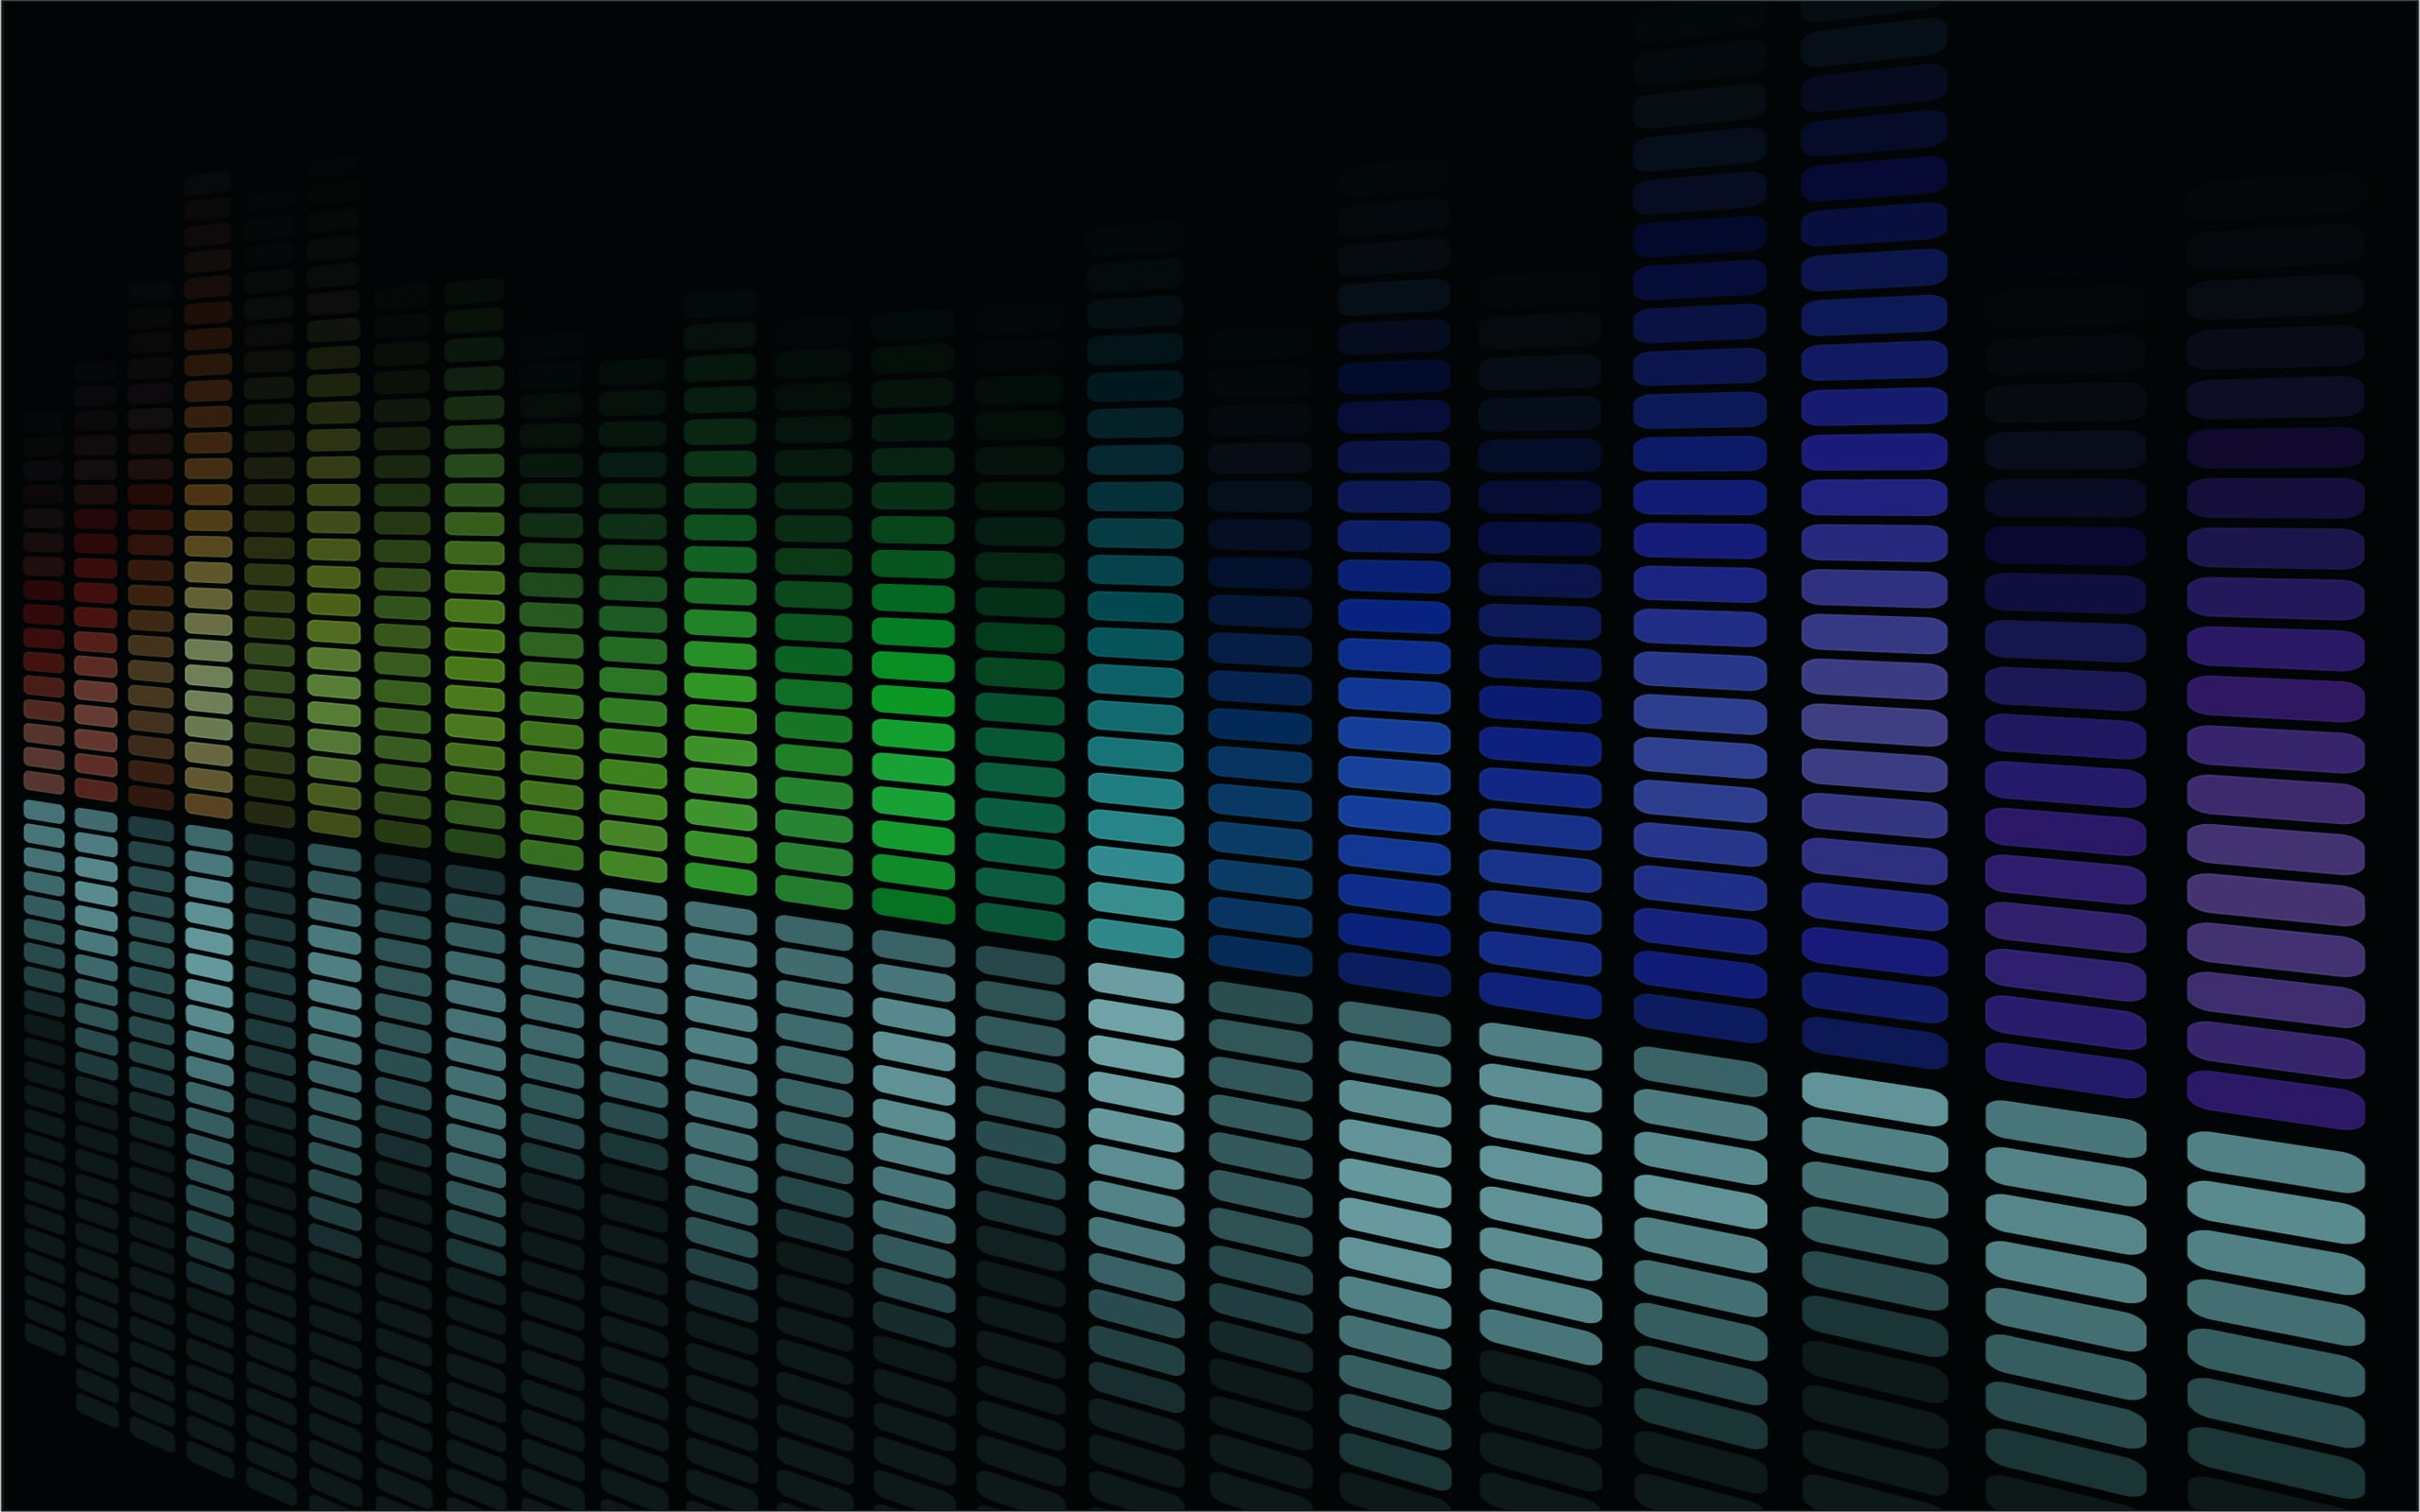 minimalism, music, backgrounds, multi colored, pattern, abstract